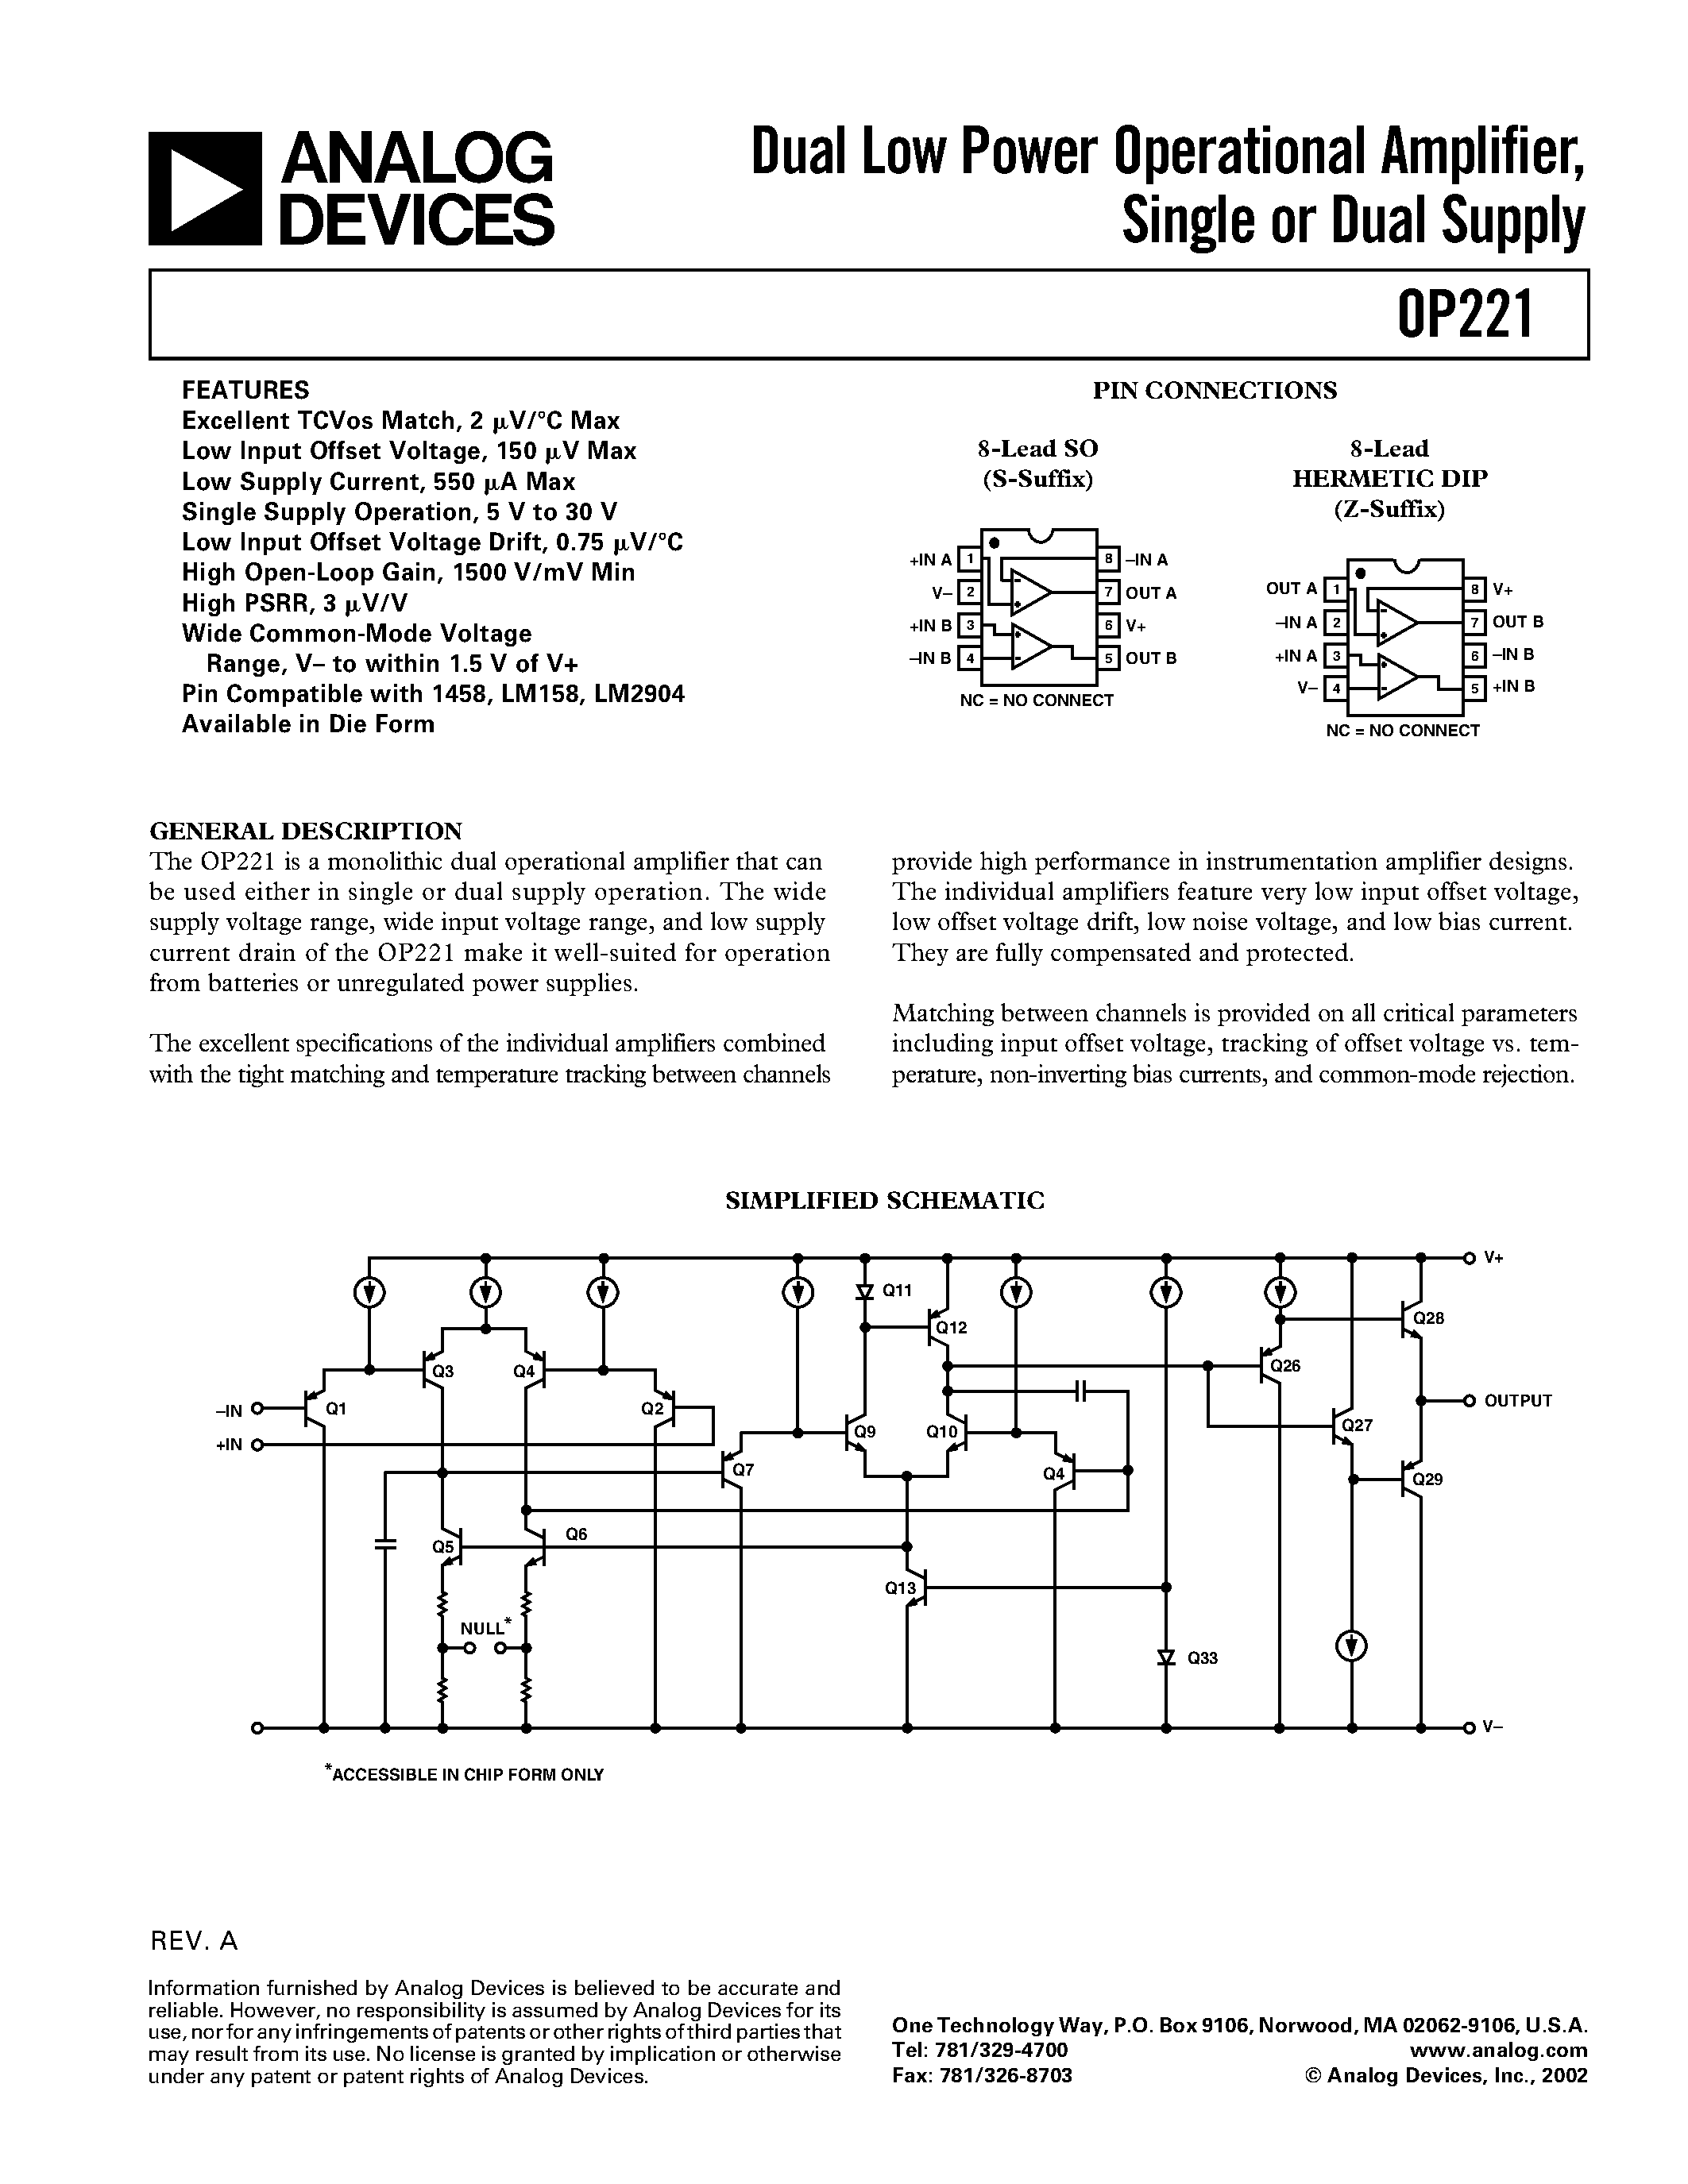 Даташит OP221 - Dual Low Power Operational Amplifier / Single or Dual Supply страница 1